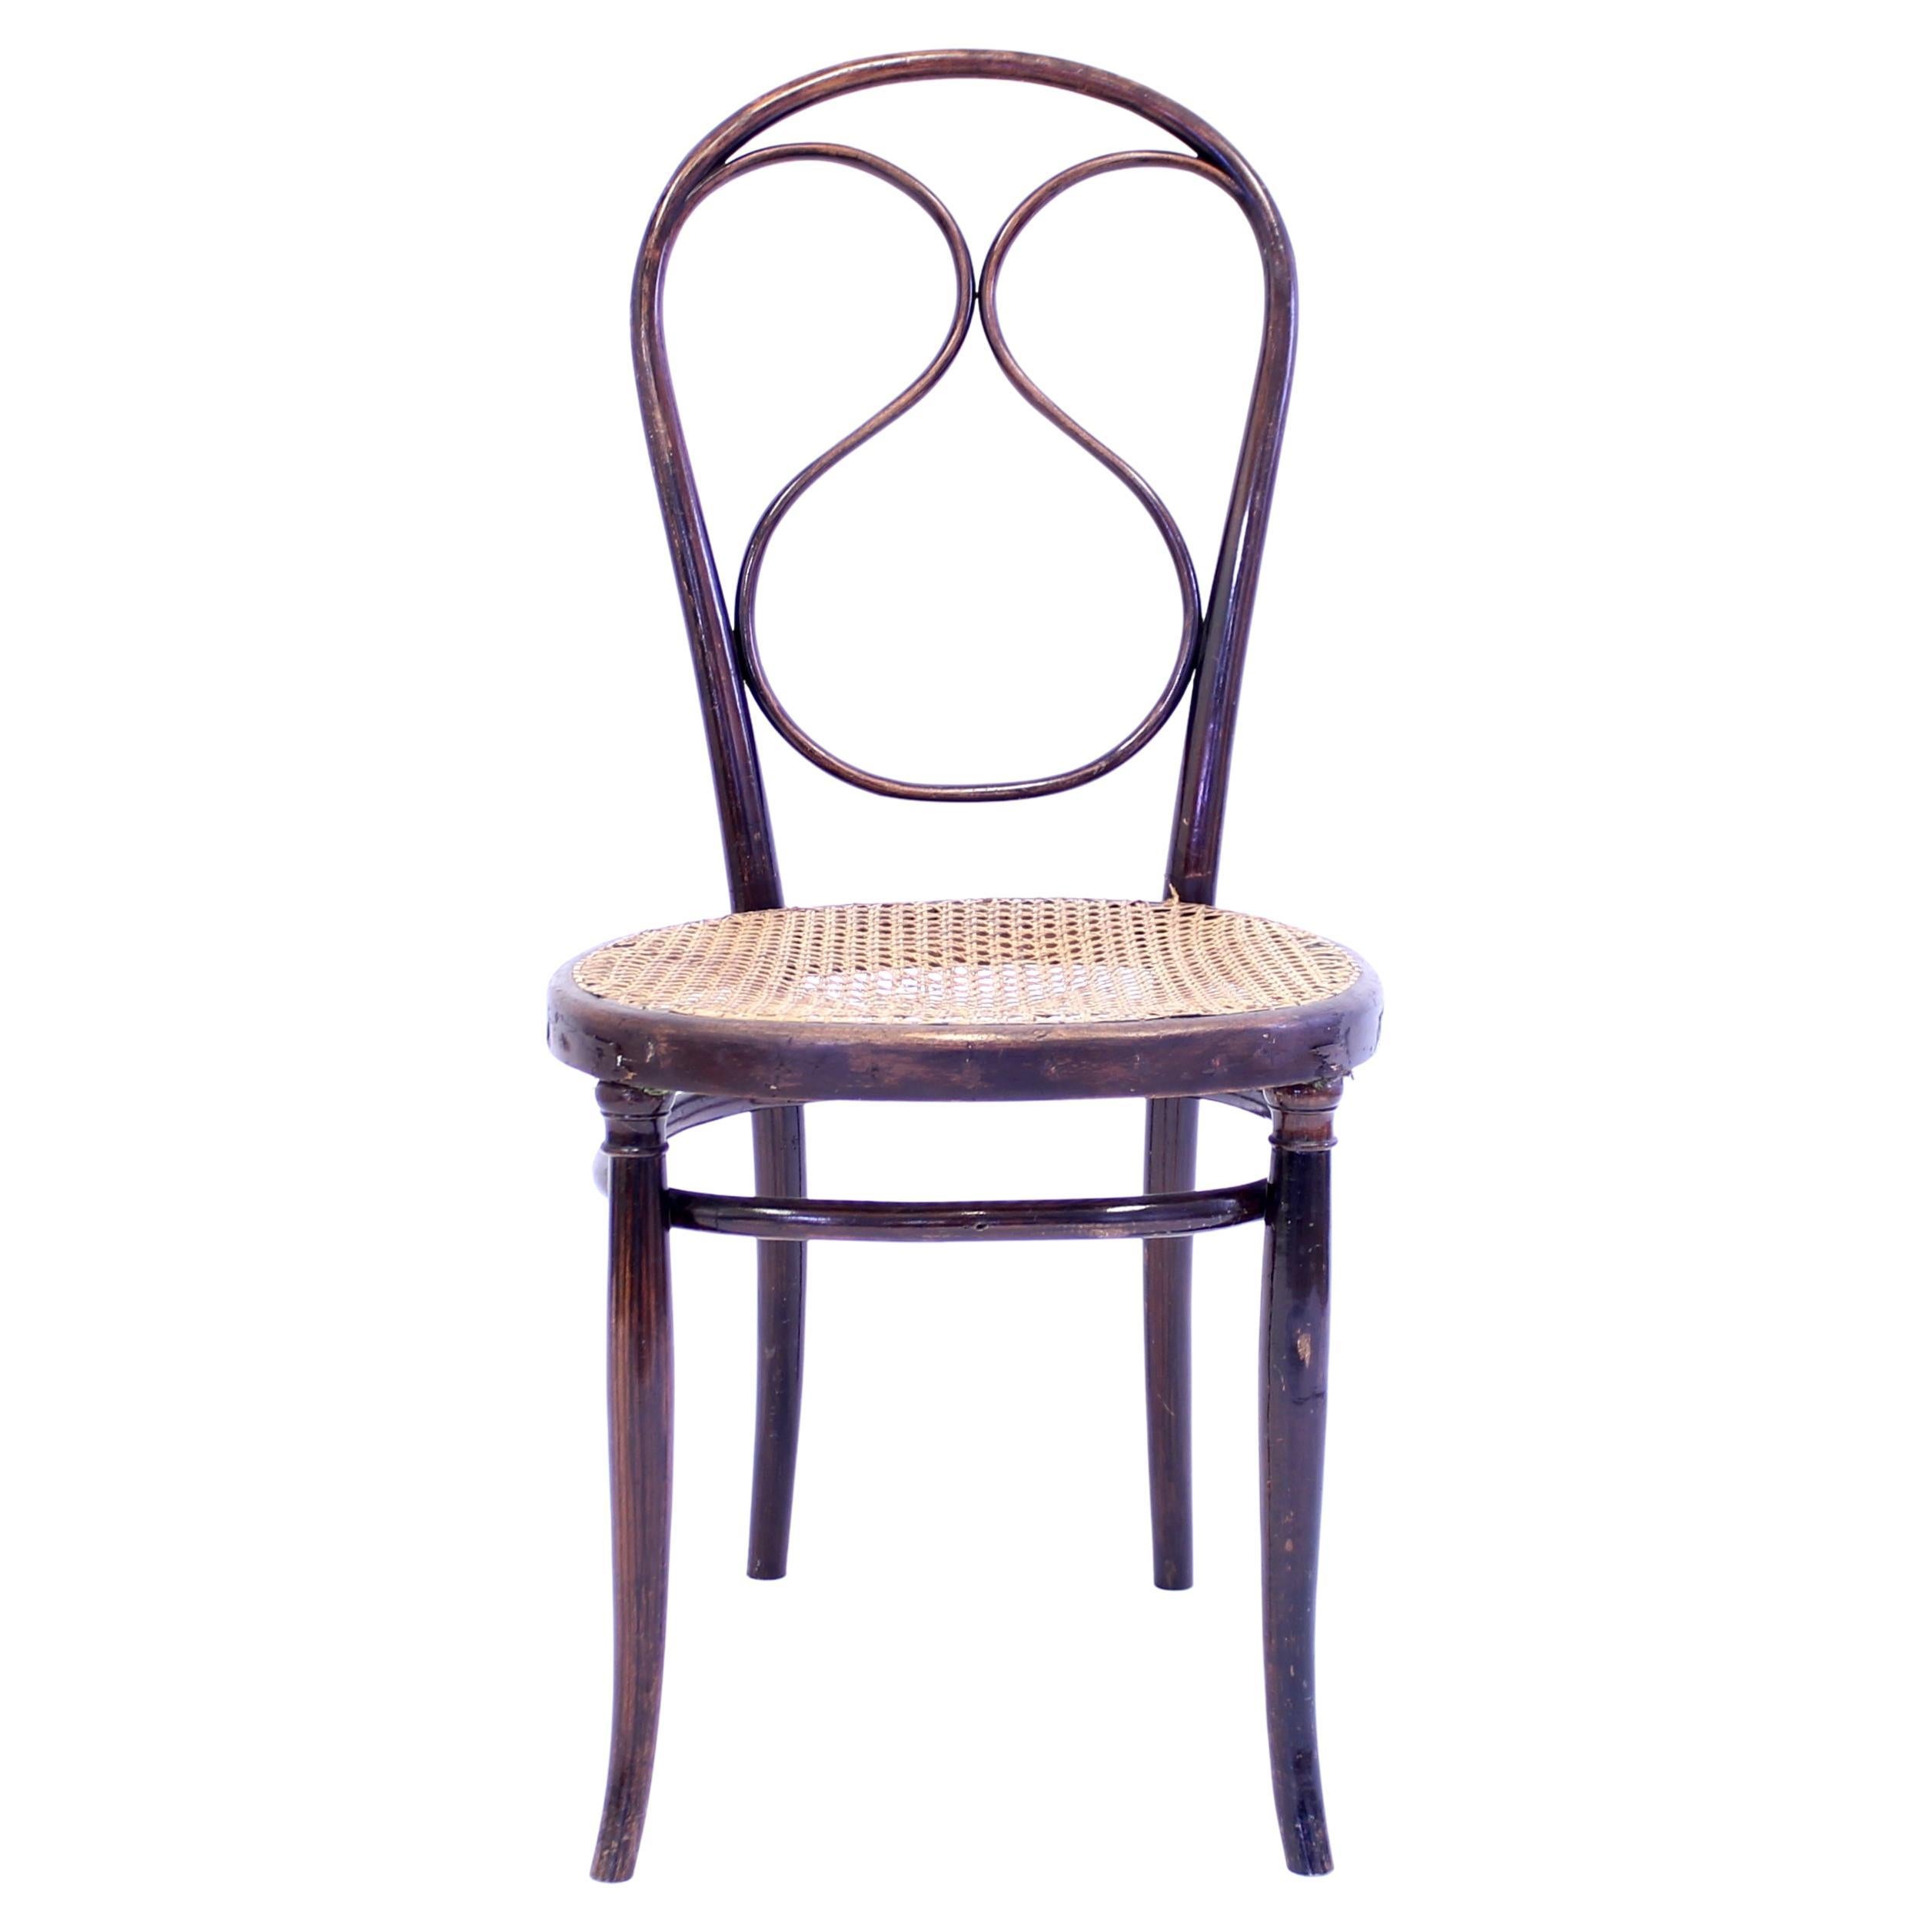 Fischel bentwood café chair, early 20thy century For Sale